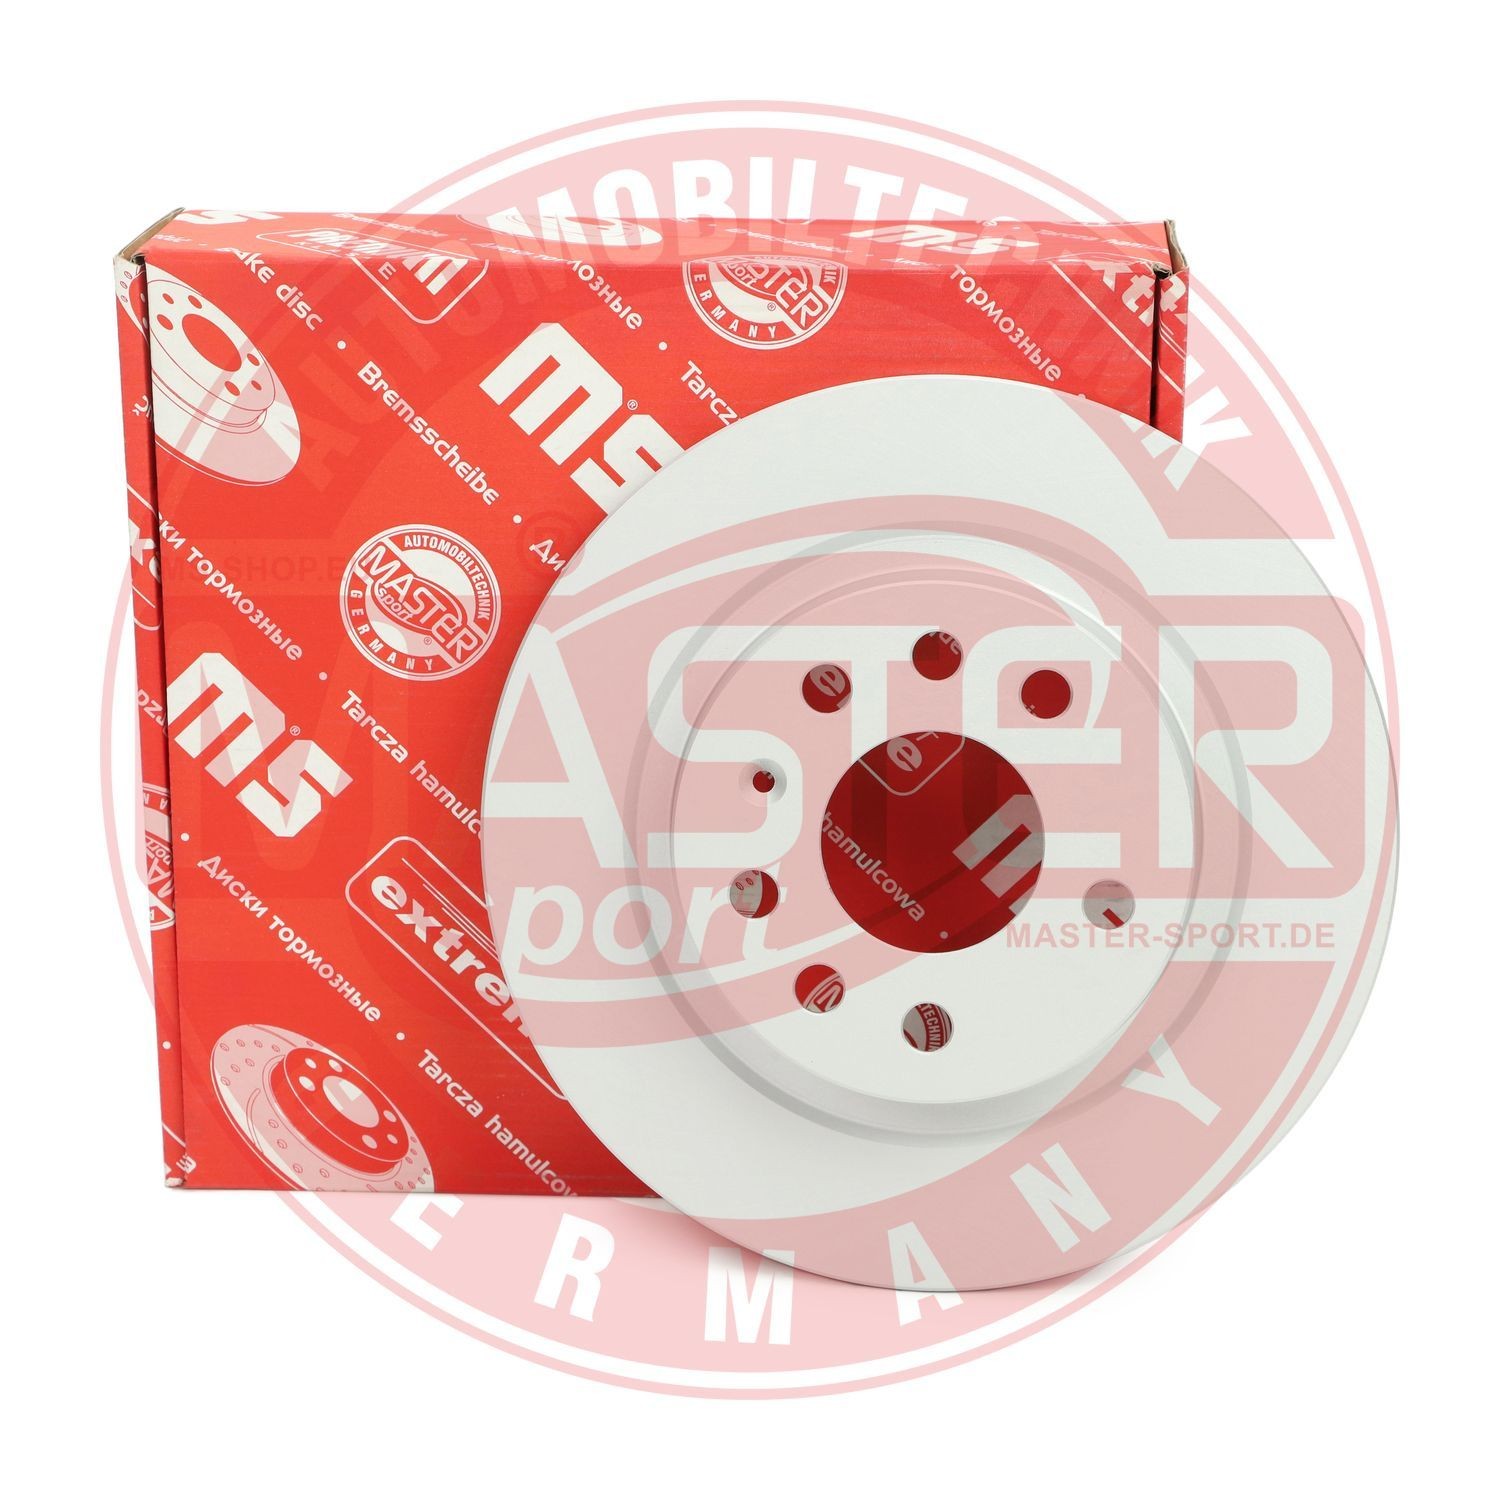 24011003391PRPCSMS Brake disc MASTER-SPORT AB211003395 review and test